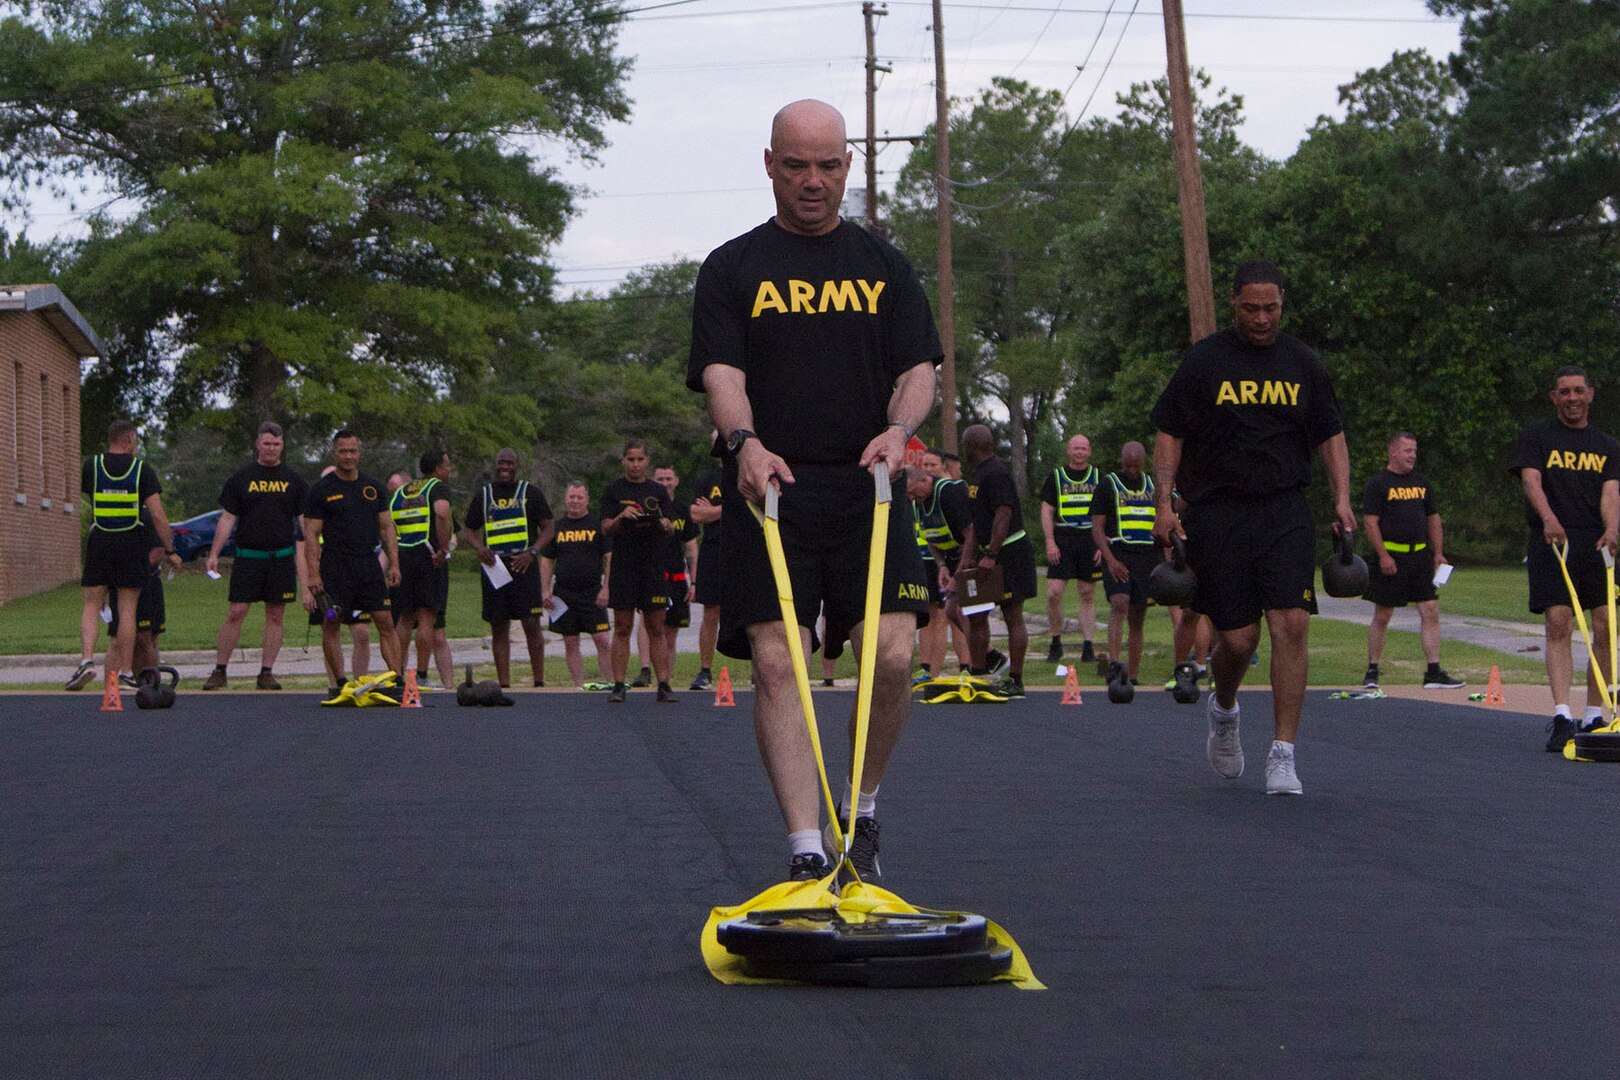 U.S. Army Sergeants Major and enlisted Soldiers from across the country pilot in the Army Combat Readiness Test (ACRT) during the U.S. Army Drill Sergeant Training Symposium, Fort Jackson, N.C.  The ACRT is a six-event assessment designed to reduce injuries and replace the current Army Physical Fitness Test.